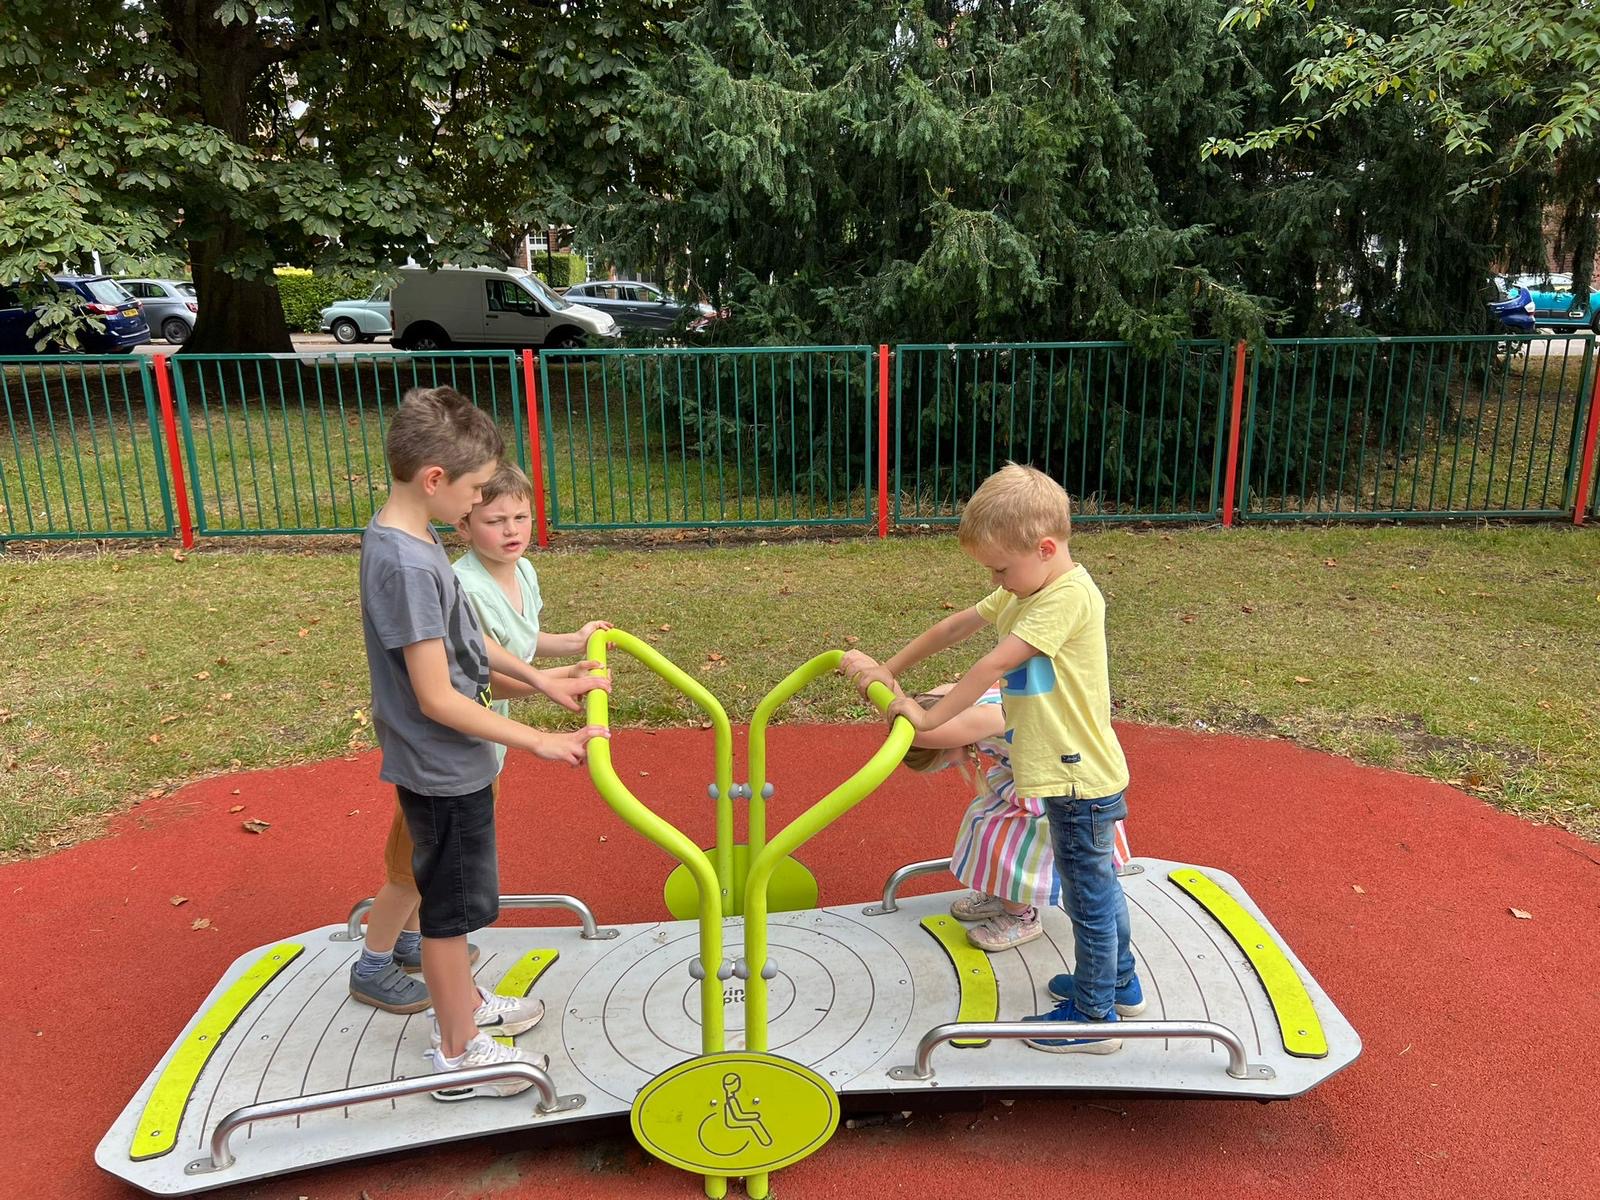 Children playing on a playground toy